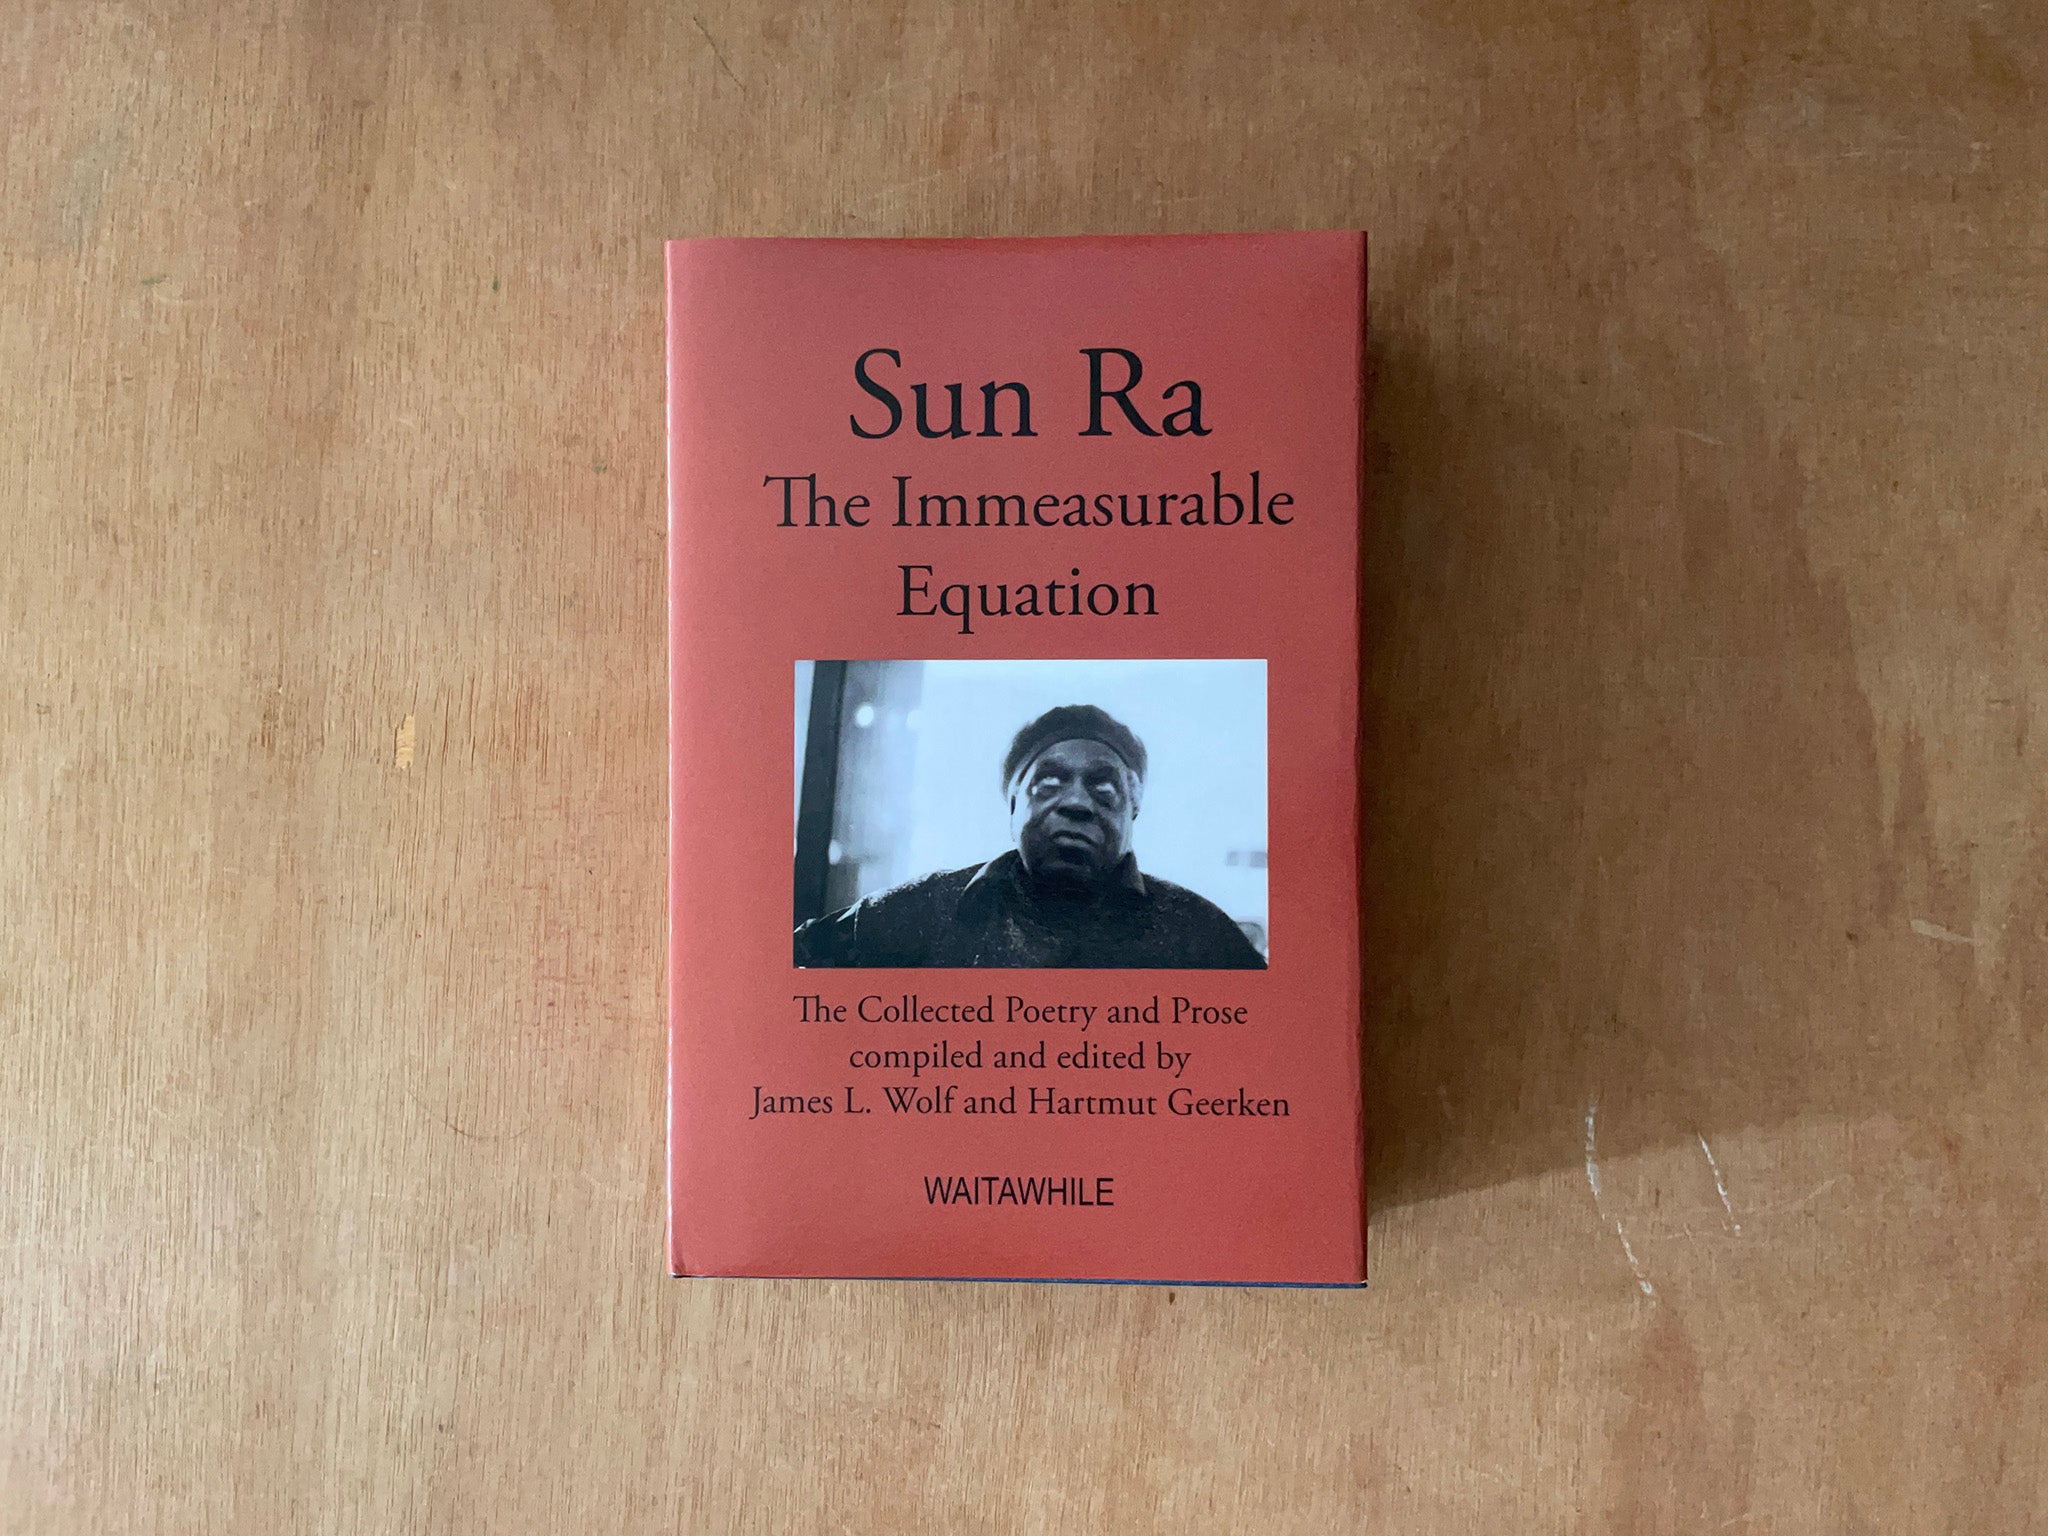 THE IMMEASURABLE EQUATION: THE COLLECTED POETRY AND PROSE by Sun Ra